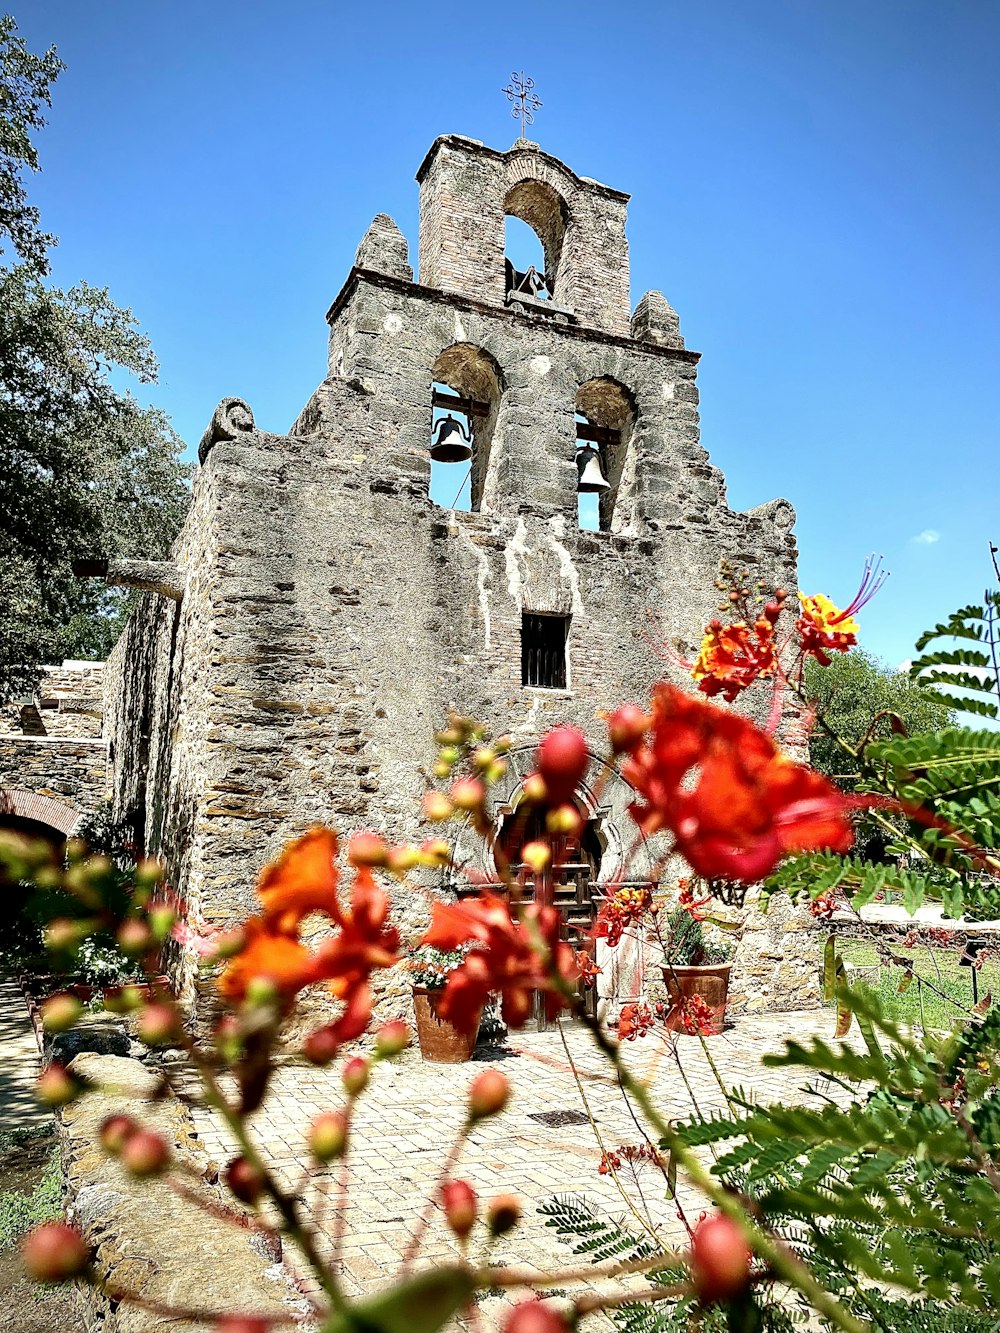 a stone building with a bell tower and flowers in the foreground